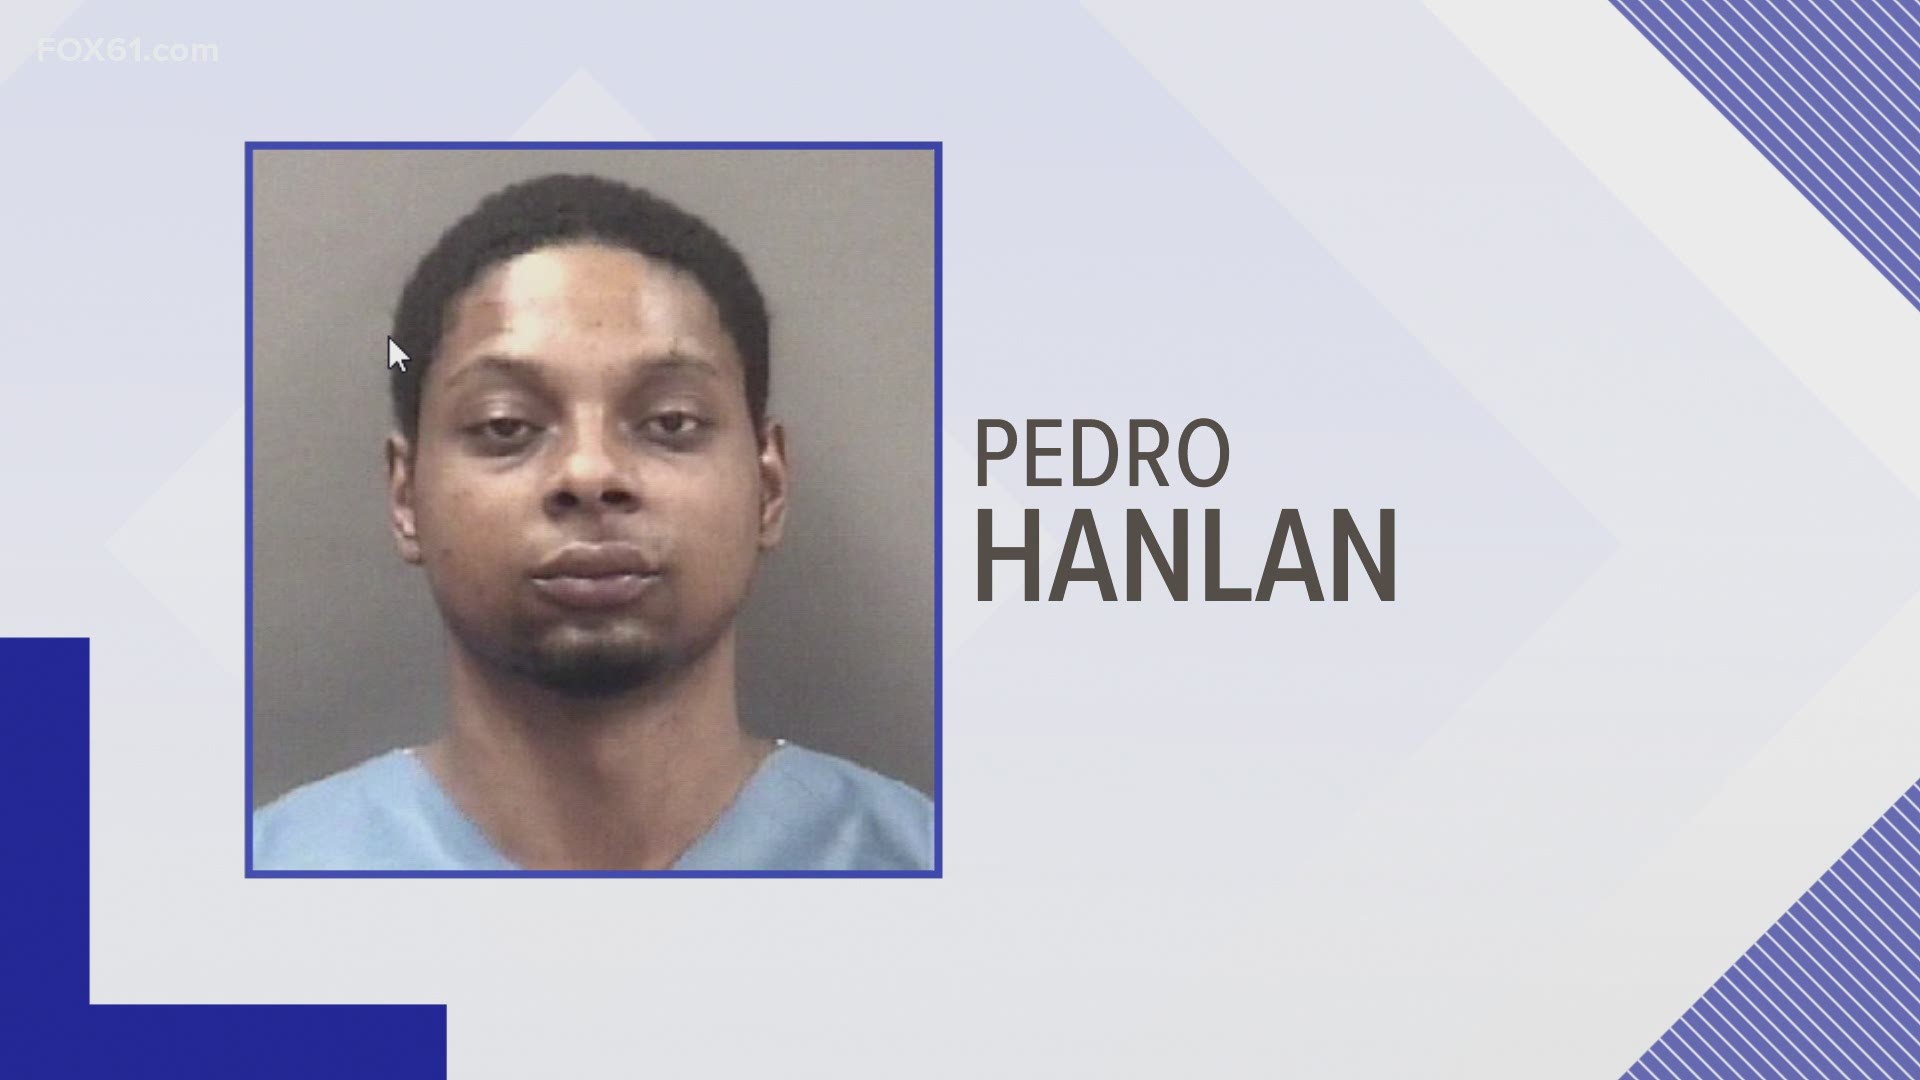 25-year-old Pedro Hanlan also assaulted two store employees after he was confronted, police said.